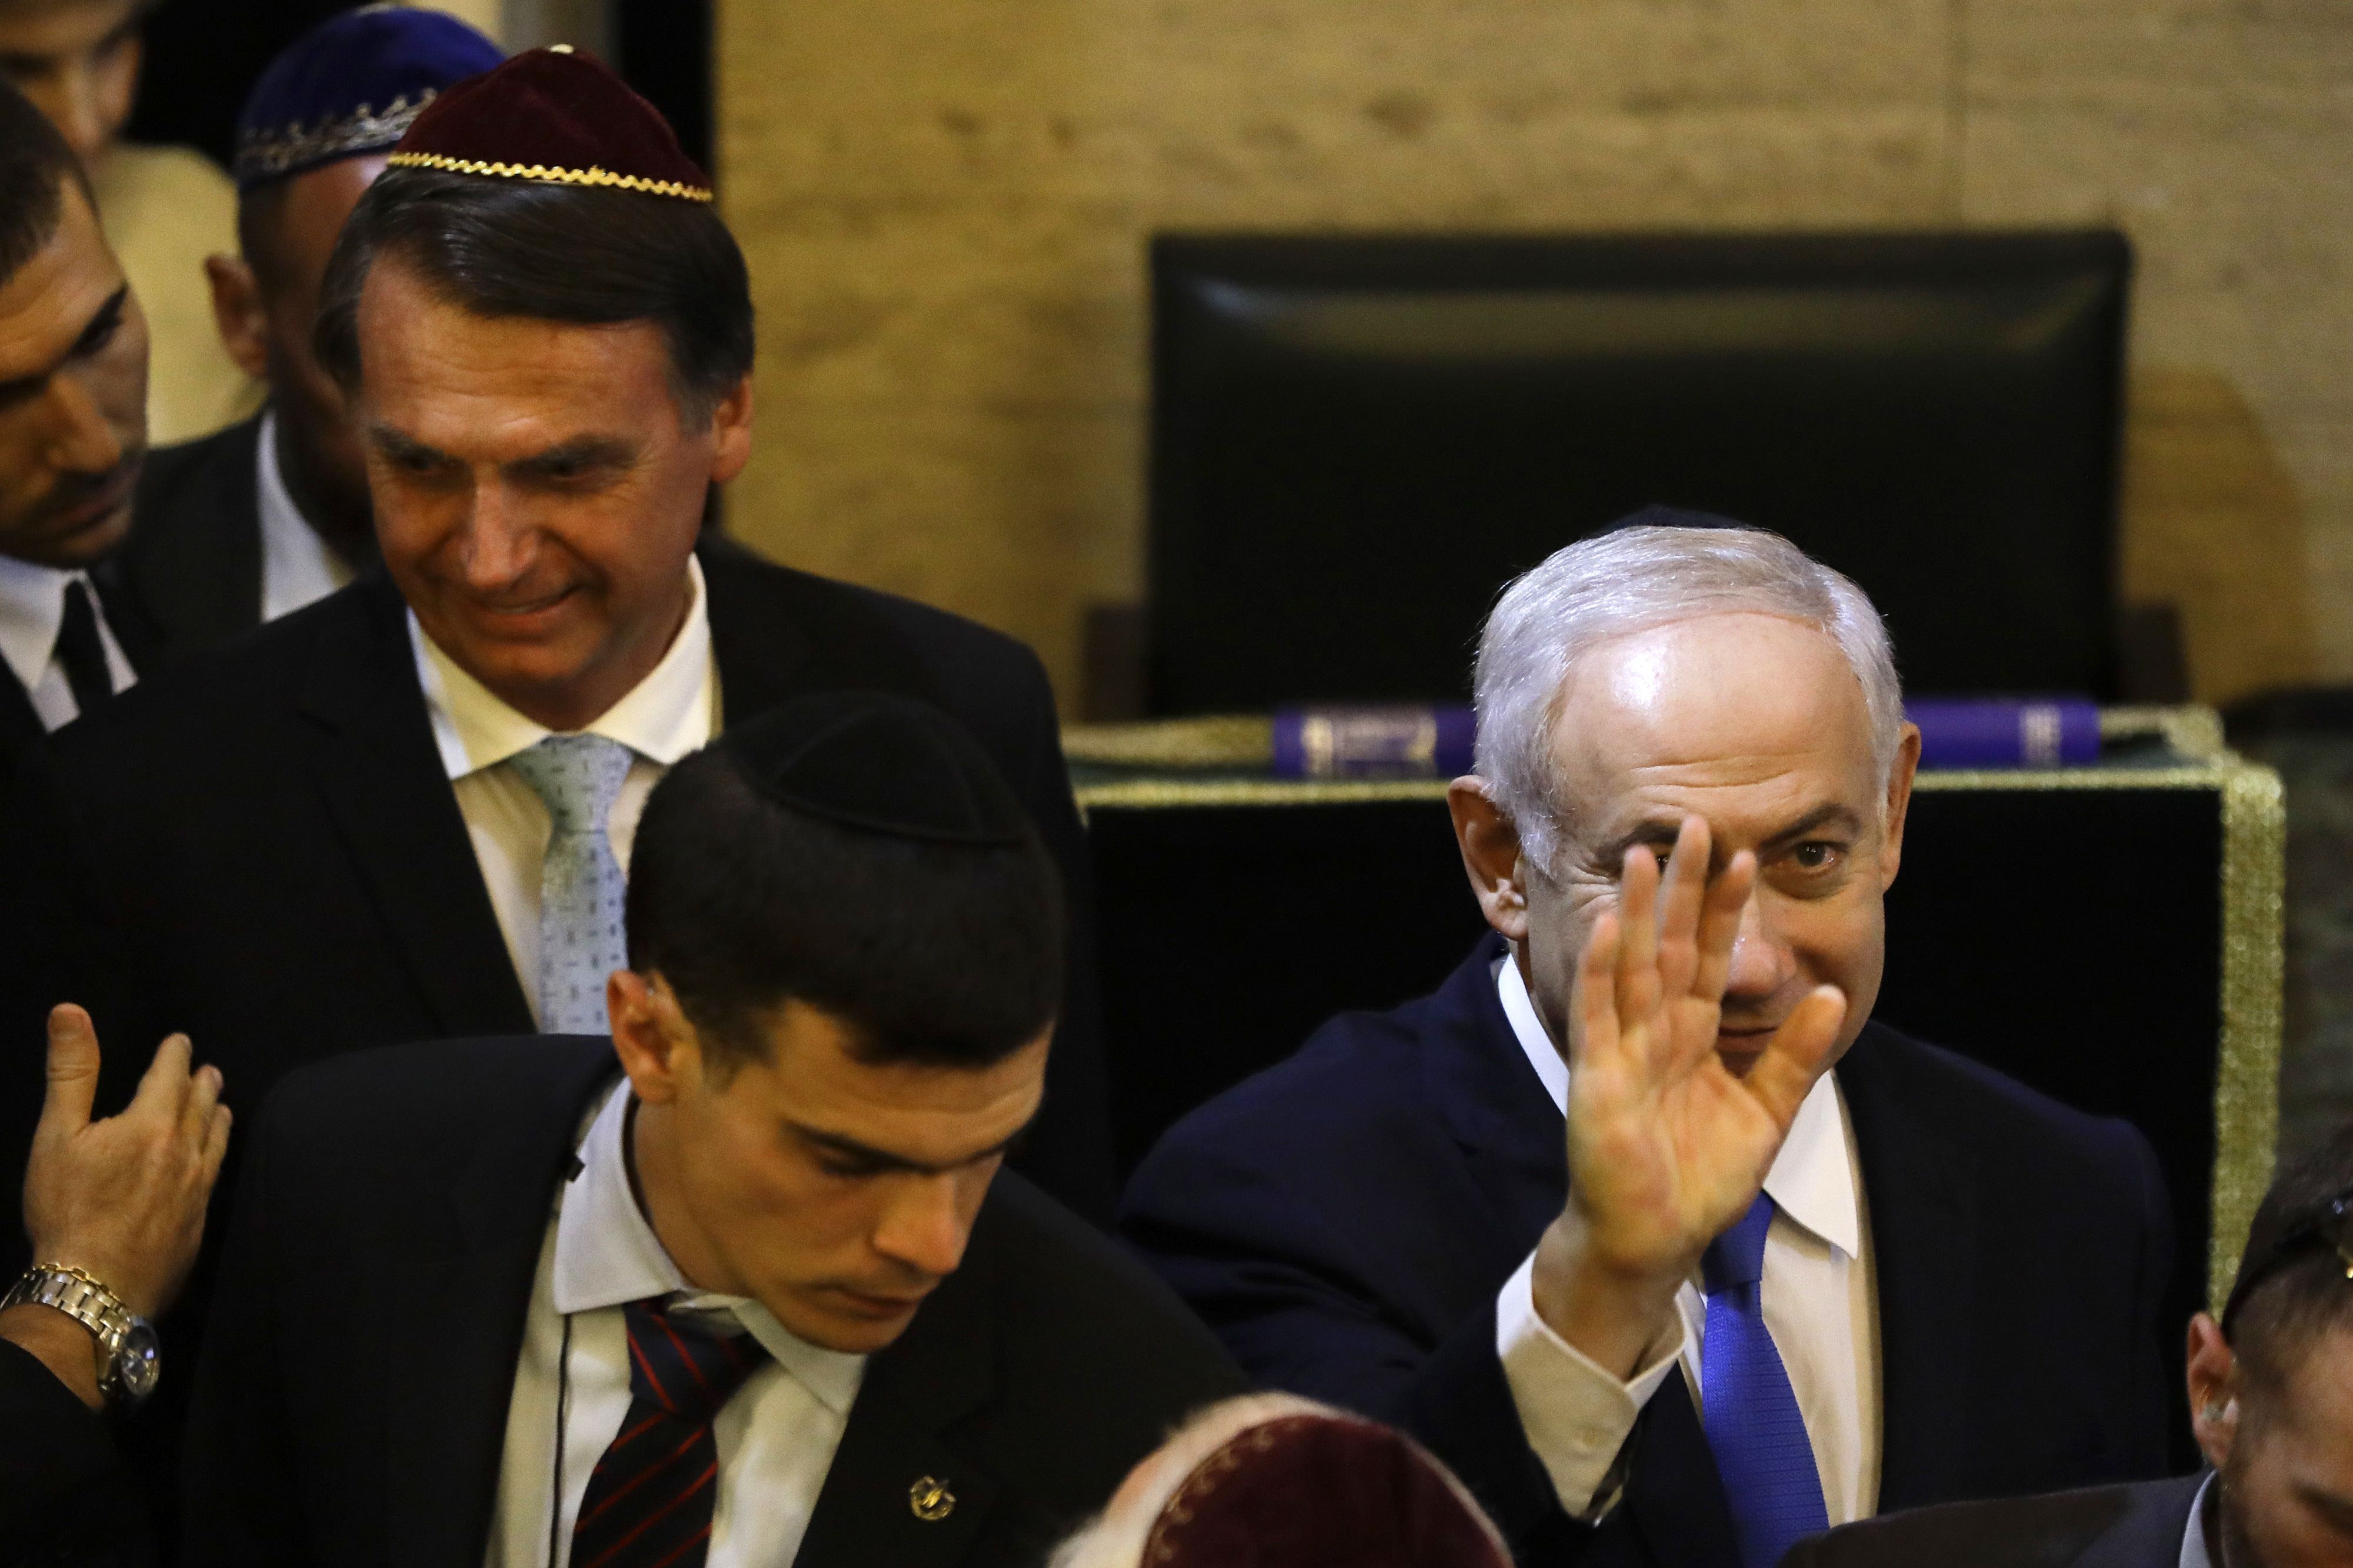 Israel's Prime Minister Benjamin Netanyahu waves as he arrives with Brazil's President-elect Jair Bolsonaro at the Kehilat Yaacov synagogue, in Rio de Janeiro, Brazil, Friday, Dec. 28, 2018. According to the Israeli Embassy, Netanyahu will stay in Rio until Tuesday, when he will travel to Brasilia for the presidential inauguration. (Leo Correa/Pool Photo via AP)